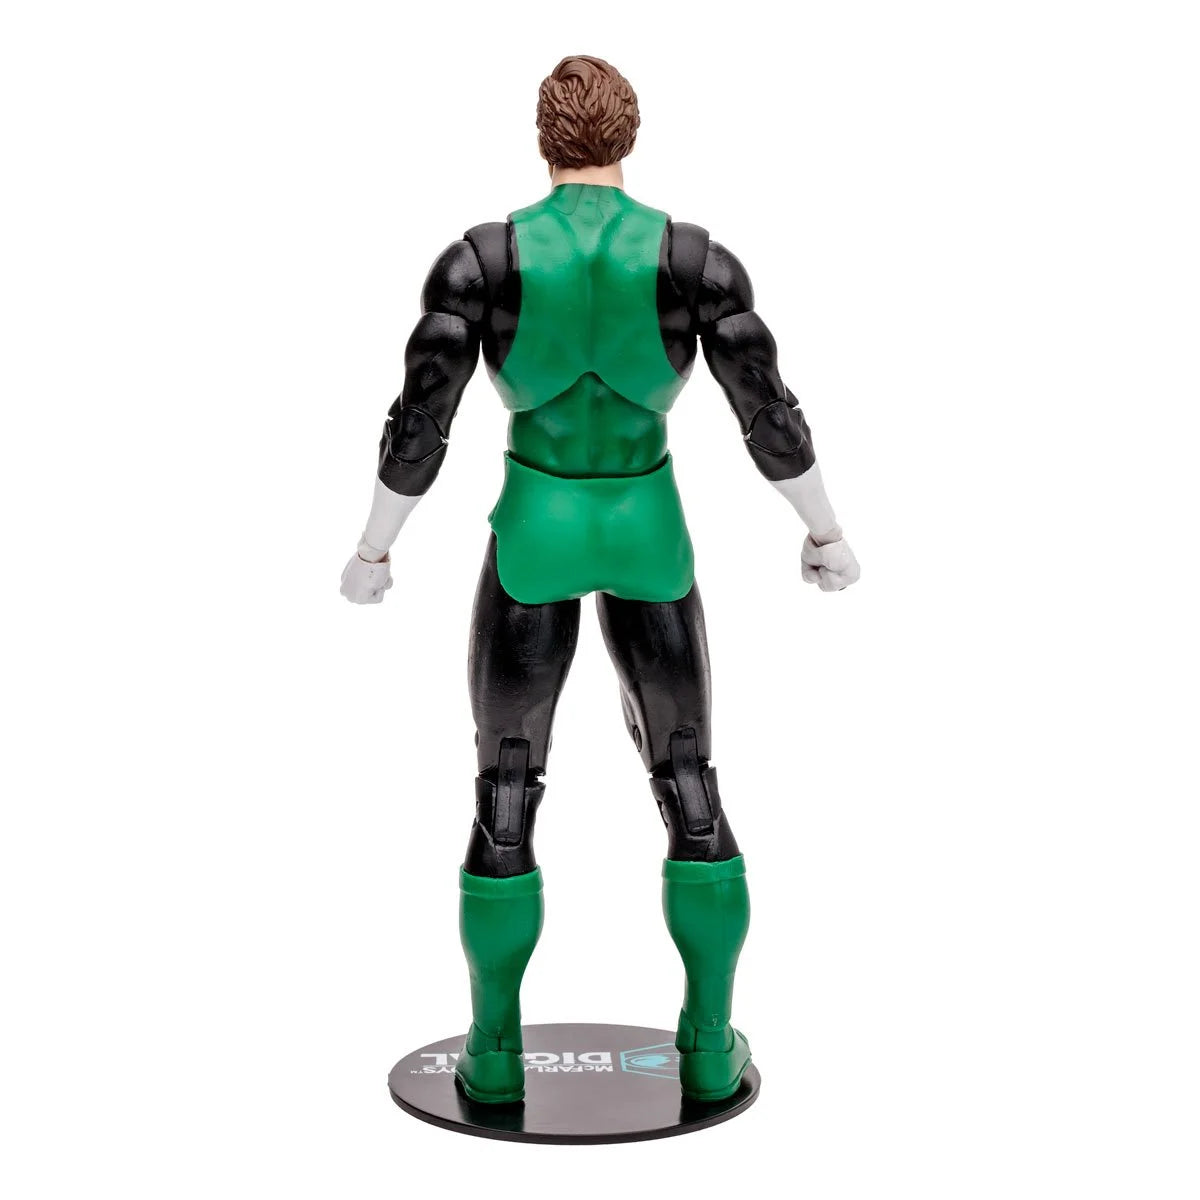 DC Direct Green Lantern Hal Jordan Silver Age 7-Inch Scale Wave 1 Action Figure with McFarlane Toys Digital Collectible